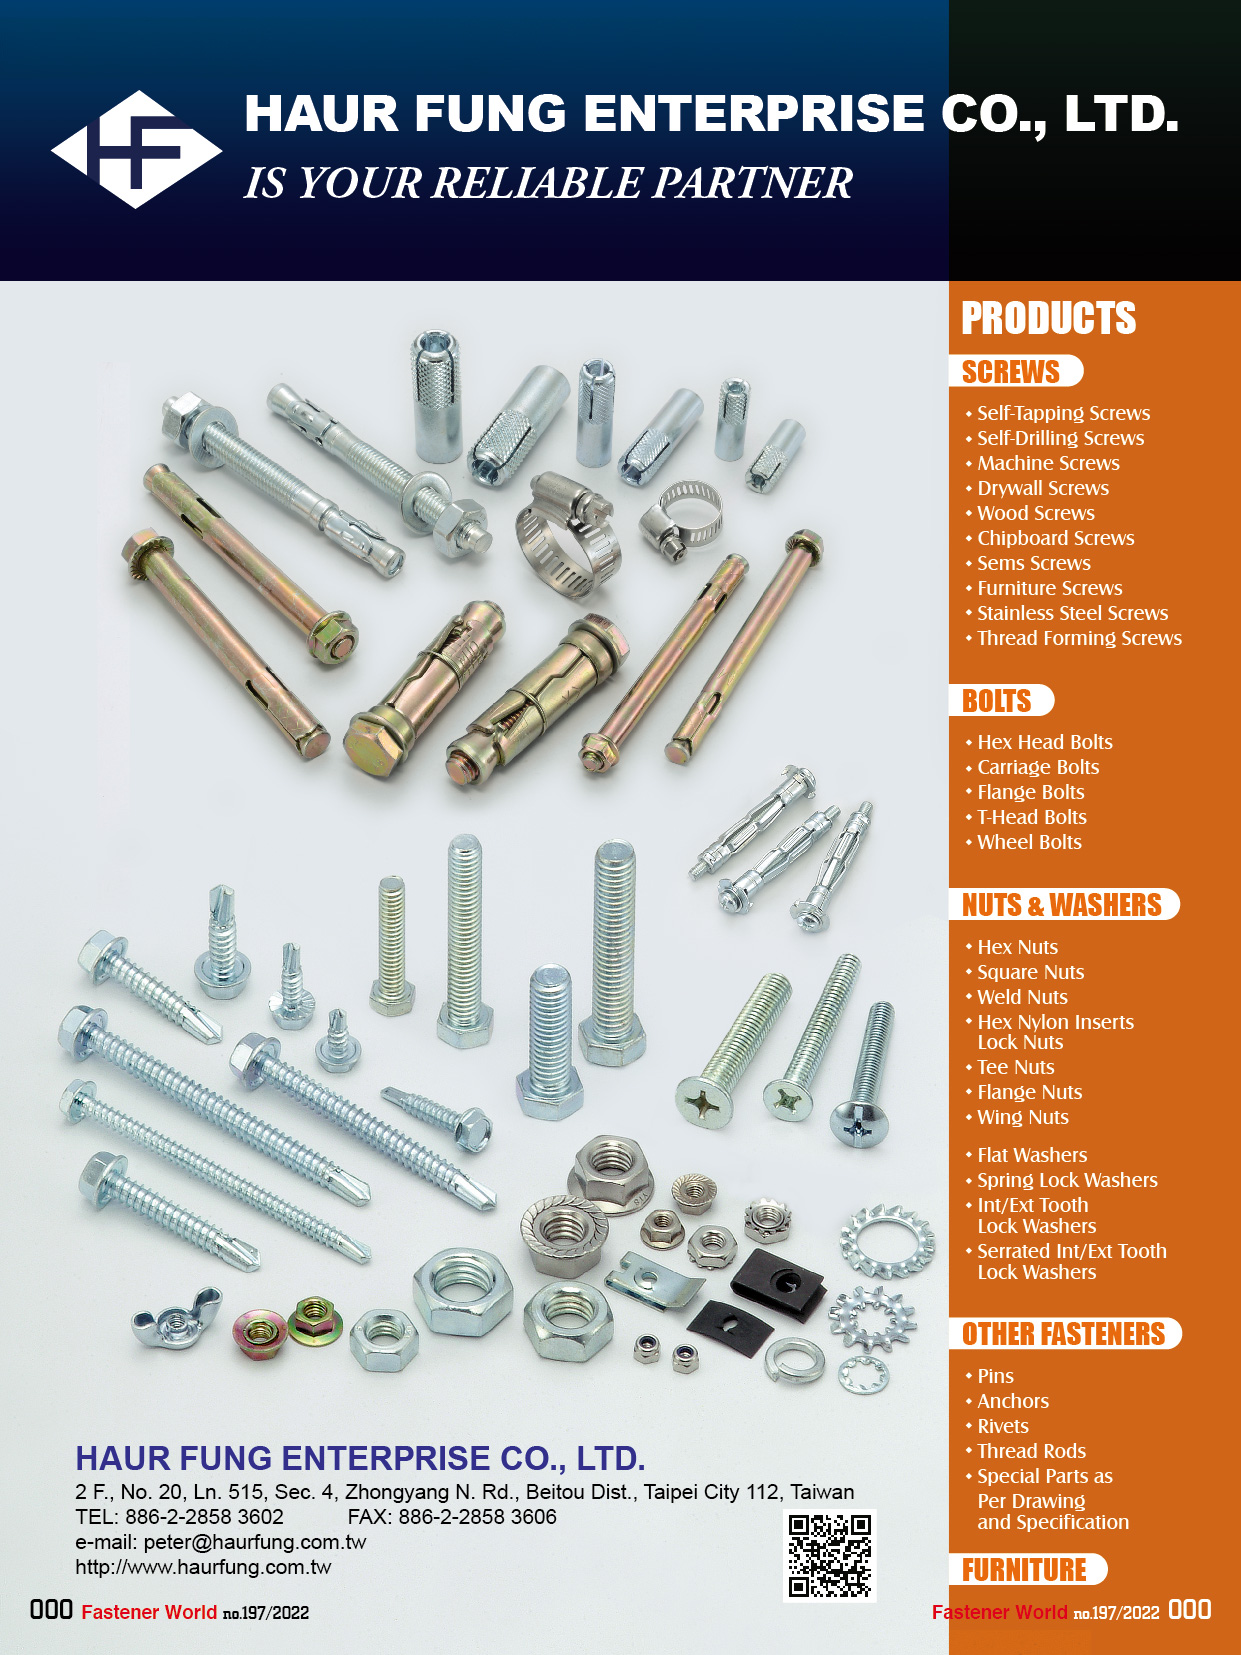 HAUR FUNG ENTERPRISE CO. LTD.  , SCREWS, SELF-DRILLING SCREWS, MACHINE SCREWS, DRYWALL SCREWS, WOOD SCREWS, CHIPBOARD SCREWS, SEMS SCREWS, FURNITURE SCREWS, STAINLESS STEEL SCREWS, THREAD FORMING SCREWS, BOLTS, HEX HEAD BOLTS, CARRIAGE BOLTS, FLANGE BOLTS, T-HEAD BOLTS, WHEEL BOLTS, NUTS, WASHERS, HEX NUTS, SQUARE NUTS, WELD NUTS, HEX NYLON INSERTS LOCK NUTS, TEE NUTS, FLANGE NUTS, WING NUTS, FLAT WASHERS, SPRING LOCK WASHERS, INT/EXT TOOTH LOCK WASHERS, SERRATED INT/EXT TOOTH LOCK WASHERS, FASTENERS, PINS, ANCHORS, RIVETS, THREAD RODS, SPECIAL PARTS AS PER DRAWING AND SPECIFICATION , Self-Tapping Screws